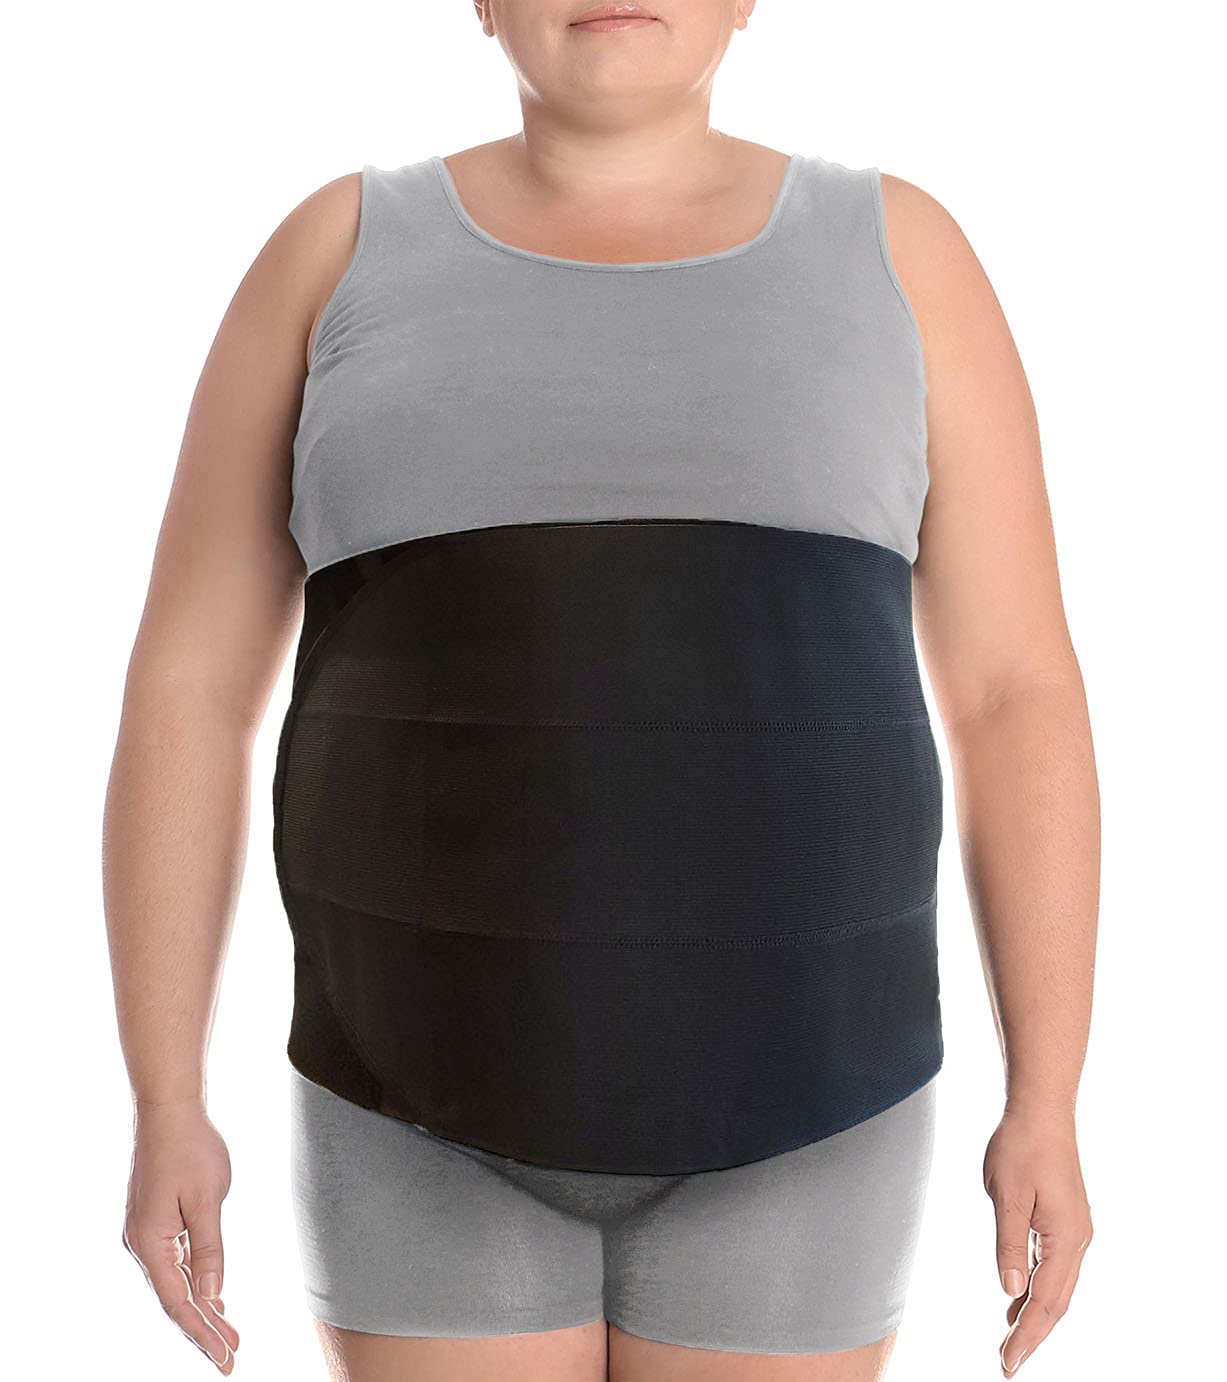 Plus Size Bariatric Back Support Belt Girdle for Obesity Low Back and Hip  Pain Relief - 3XL